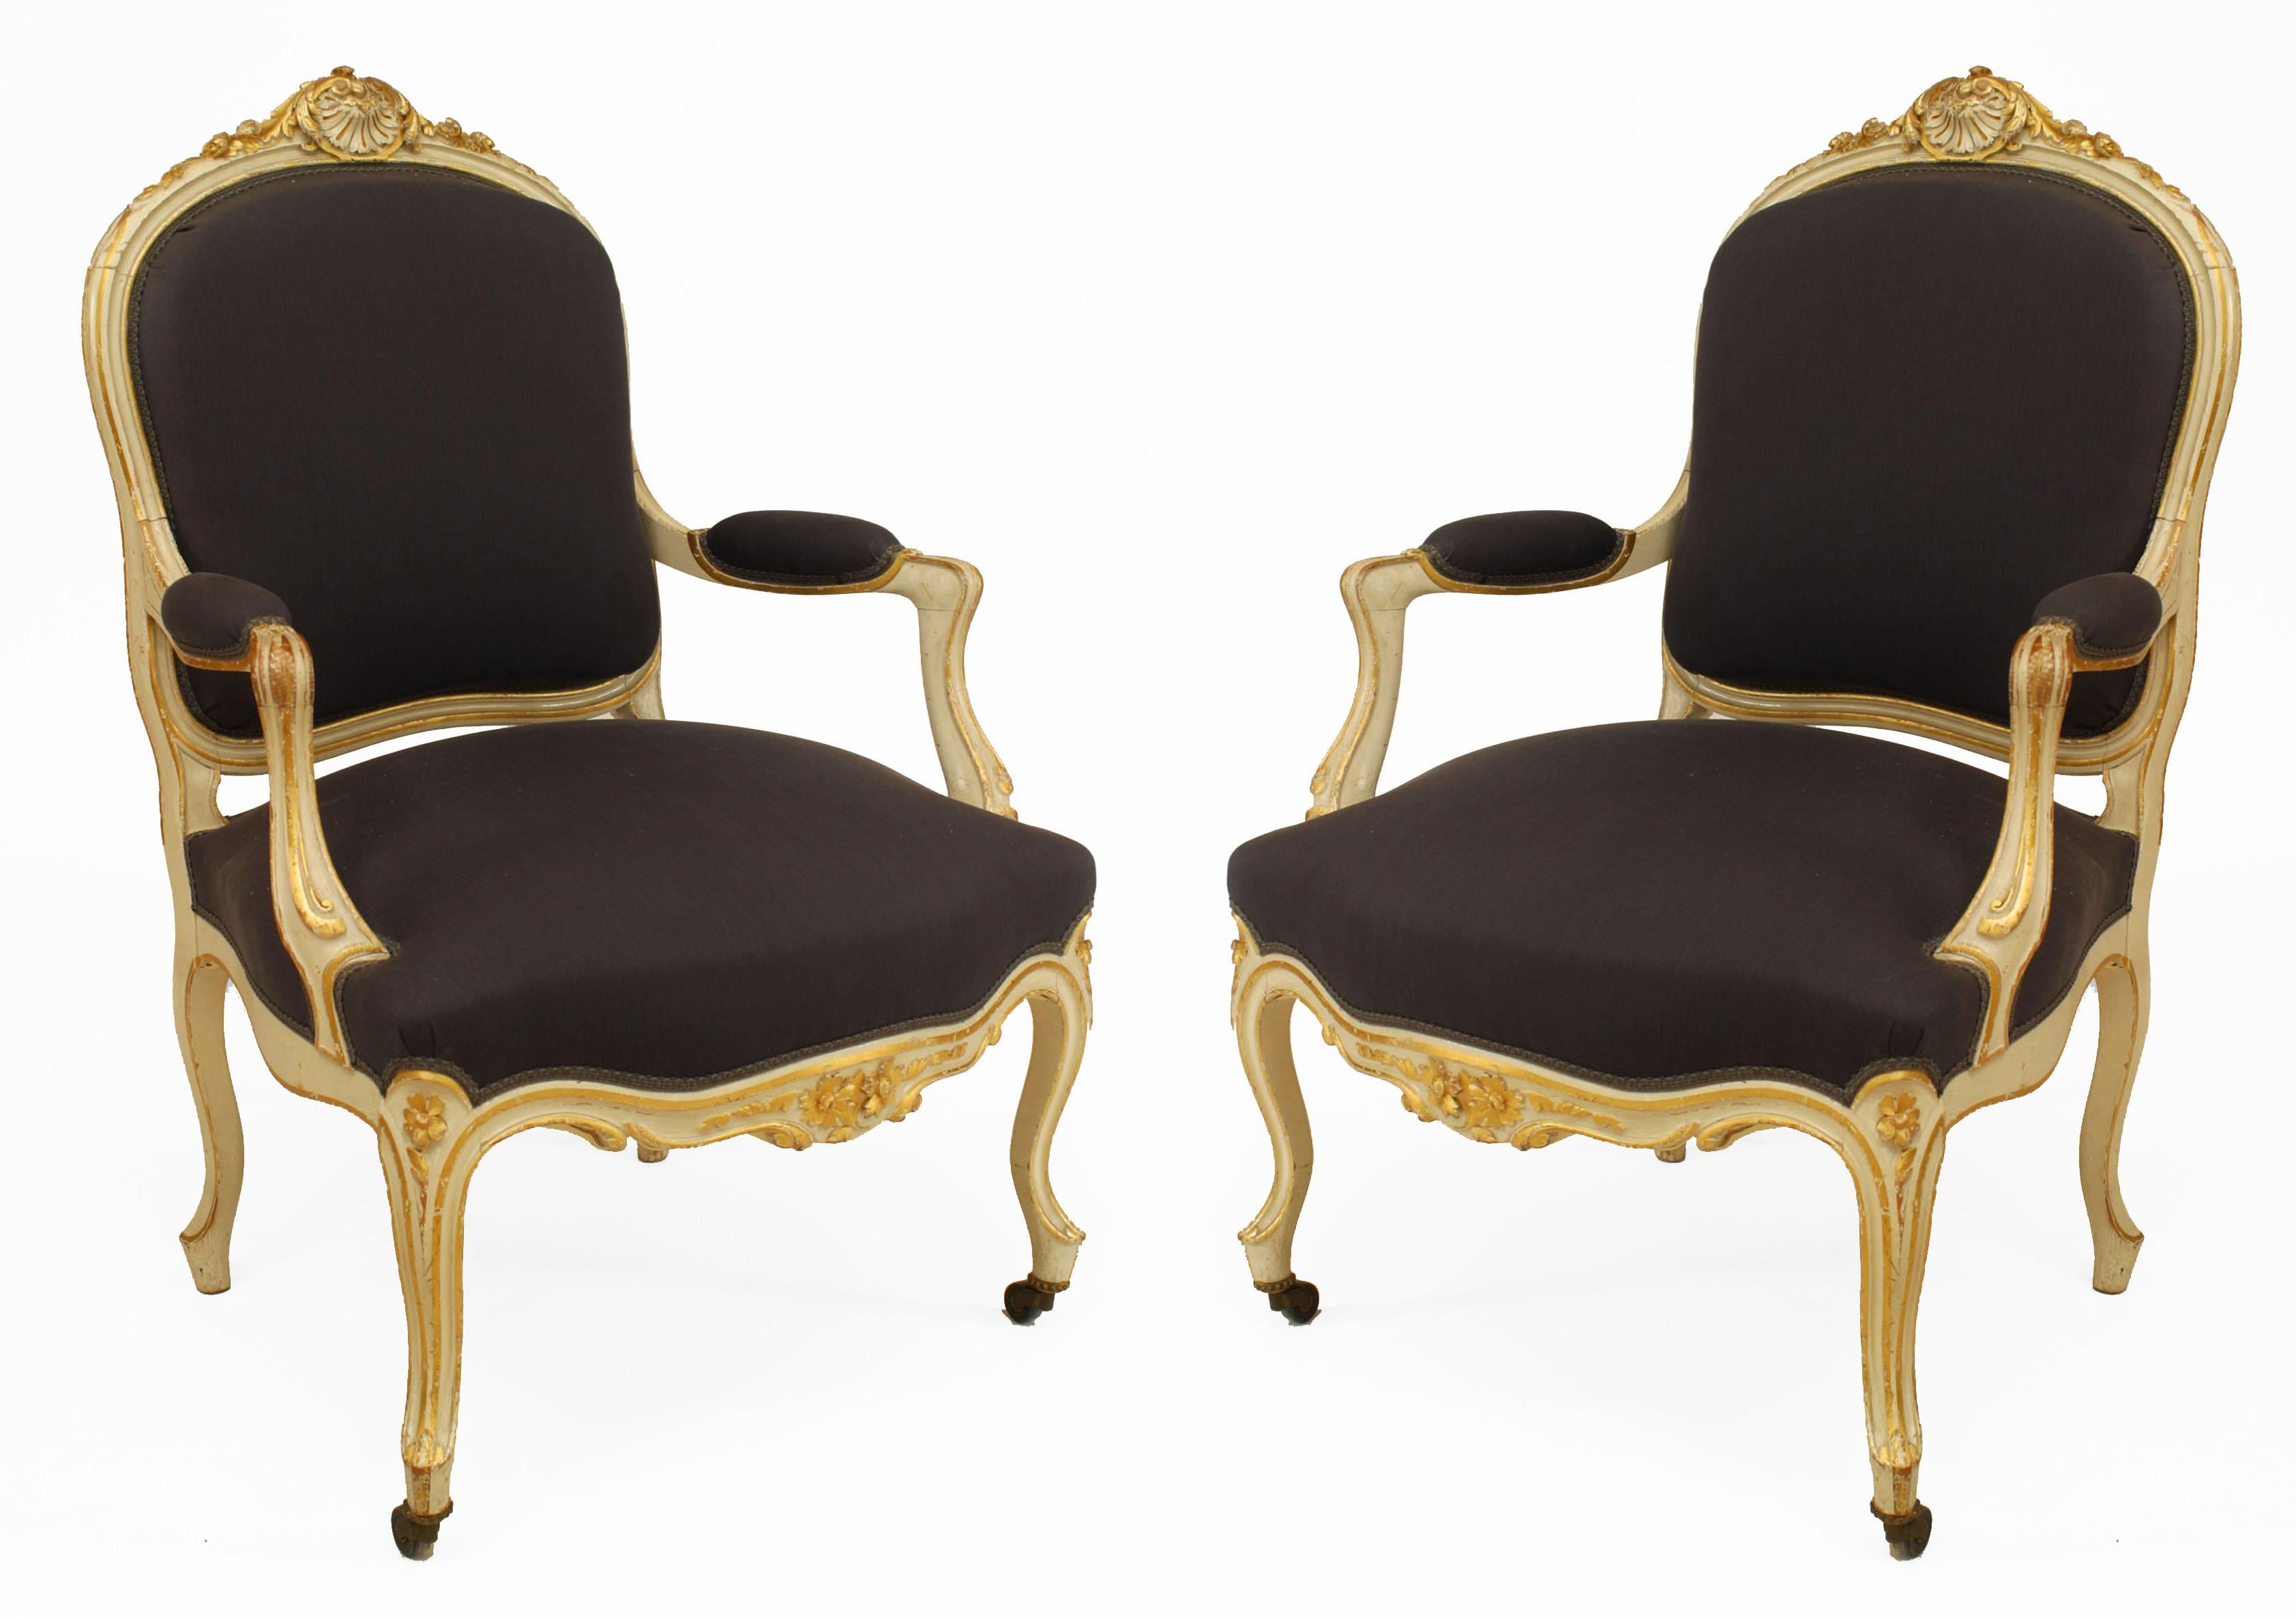 Set of 4 French Louis XV style (19th century) white and gilt painted open armchairs with upholstered seat and back with carved back crest, 2 with dark purple upholstery, and 2 with heather gray upholstery (See also: Living room set: PPF295A, Sofa: